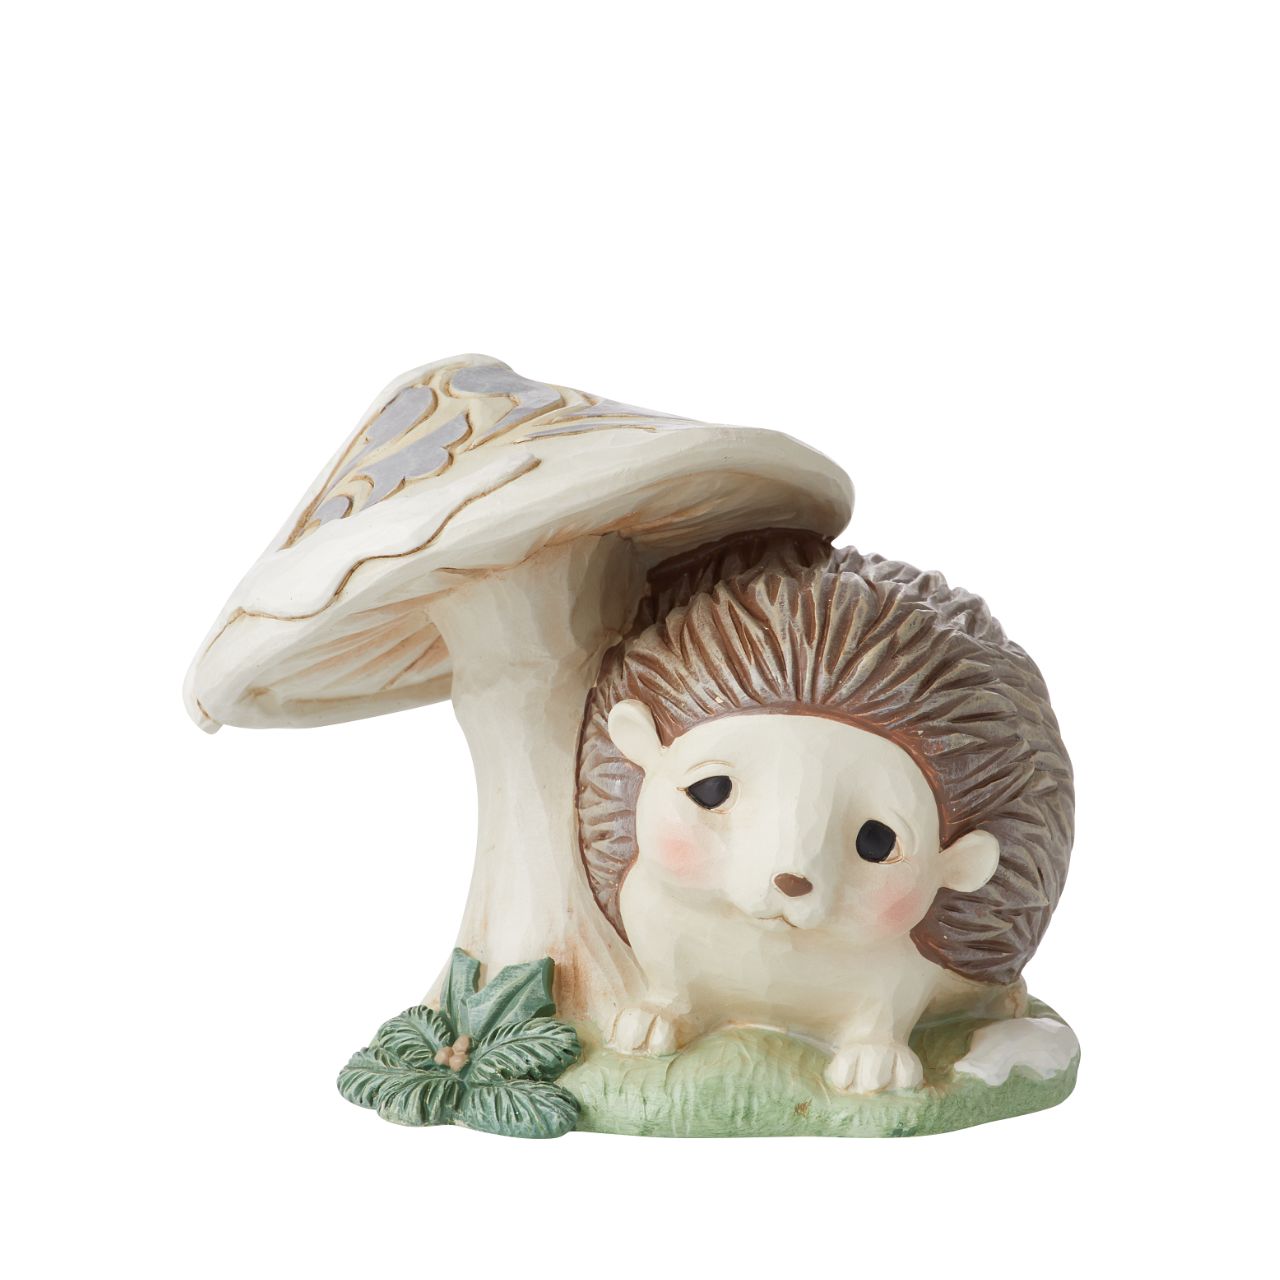 Jim Shore White Woodland Collection Hedgehog by Mushroom Mini Figurine  The White Woodland Collection showcases Intricate Jim Shore designs, with soft neutral colour palette suitable for many styles of home décor. This magical collection on Minatare Figurines is a perfect gift for anyone wanting to start a White Woodland Collection.